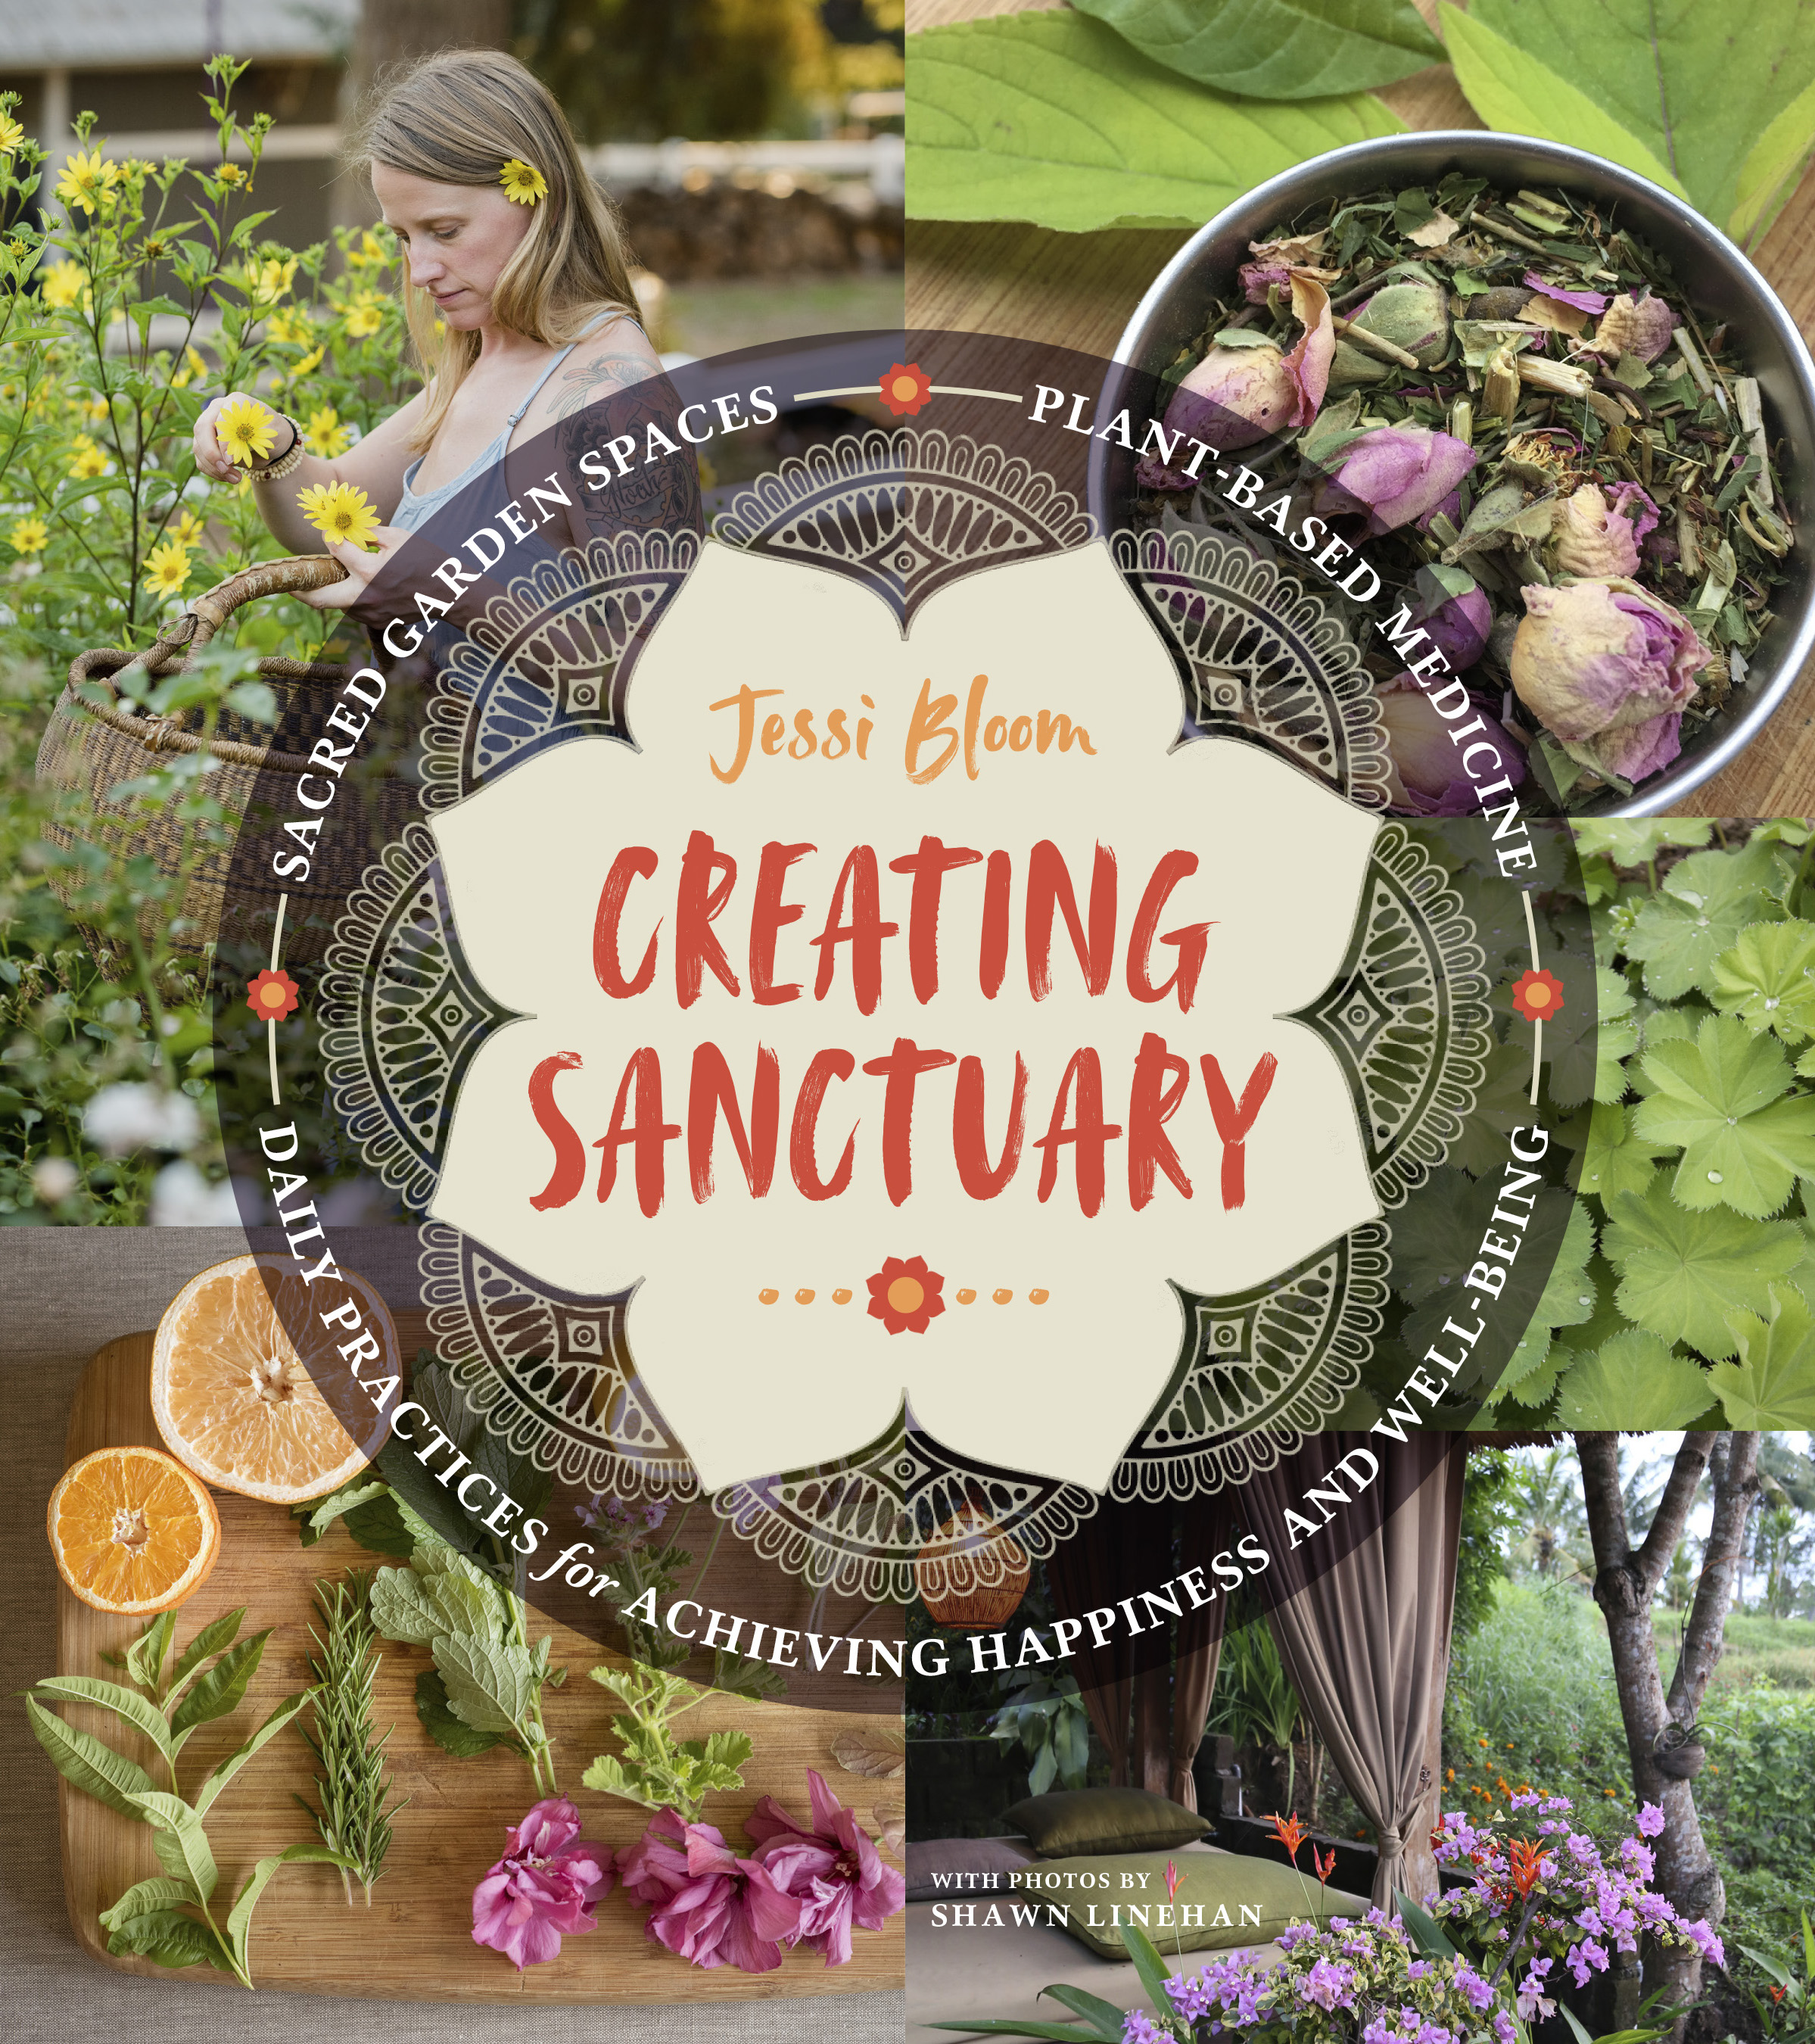 Cover image for Creating Sanctuary [electronic resource] : Sacred Garden Spaces, Plant-Based Medicine, and Daily Practices to Achieve Happiness and Well-Being